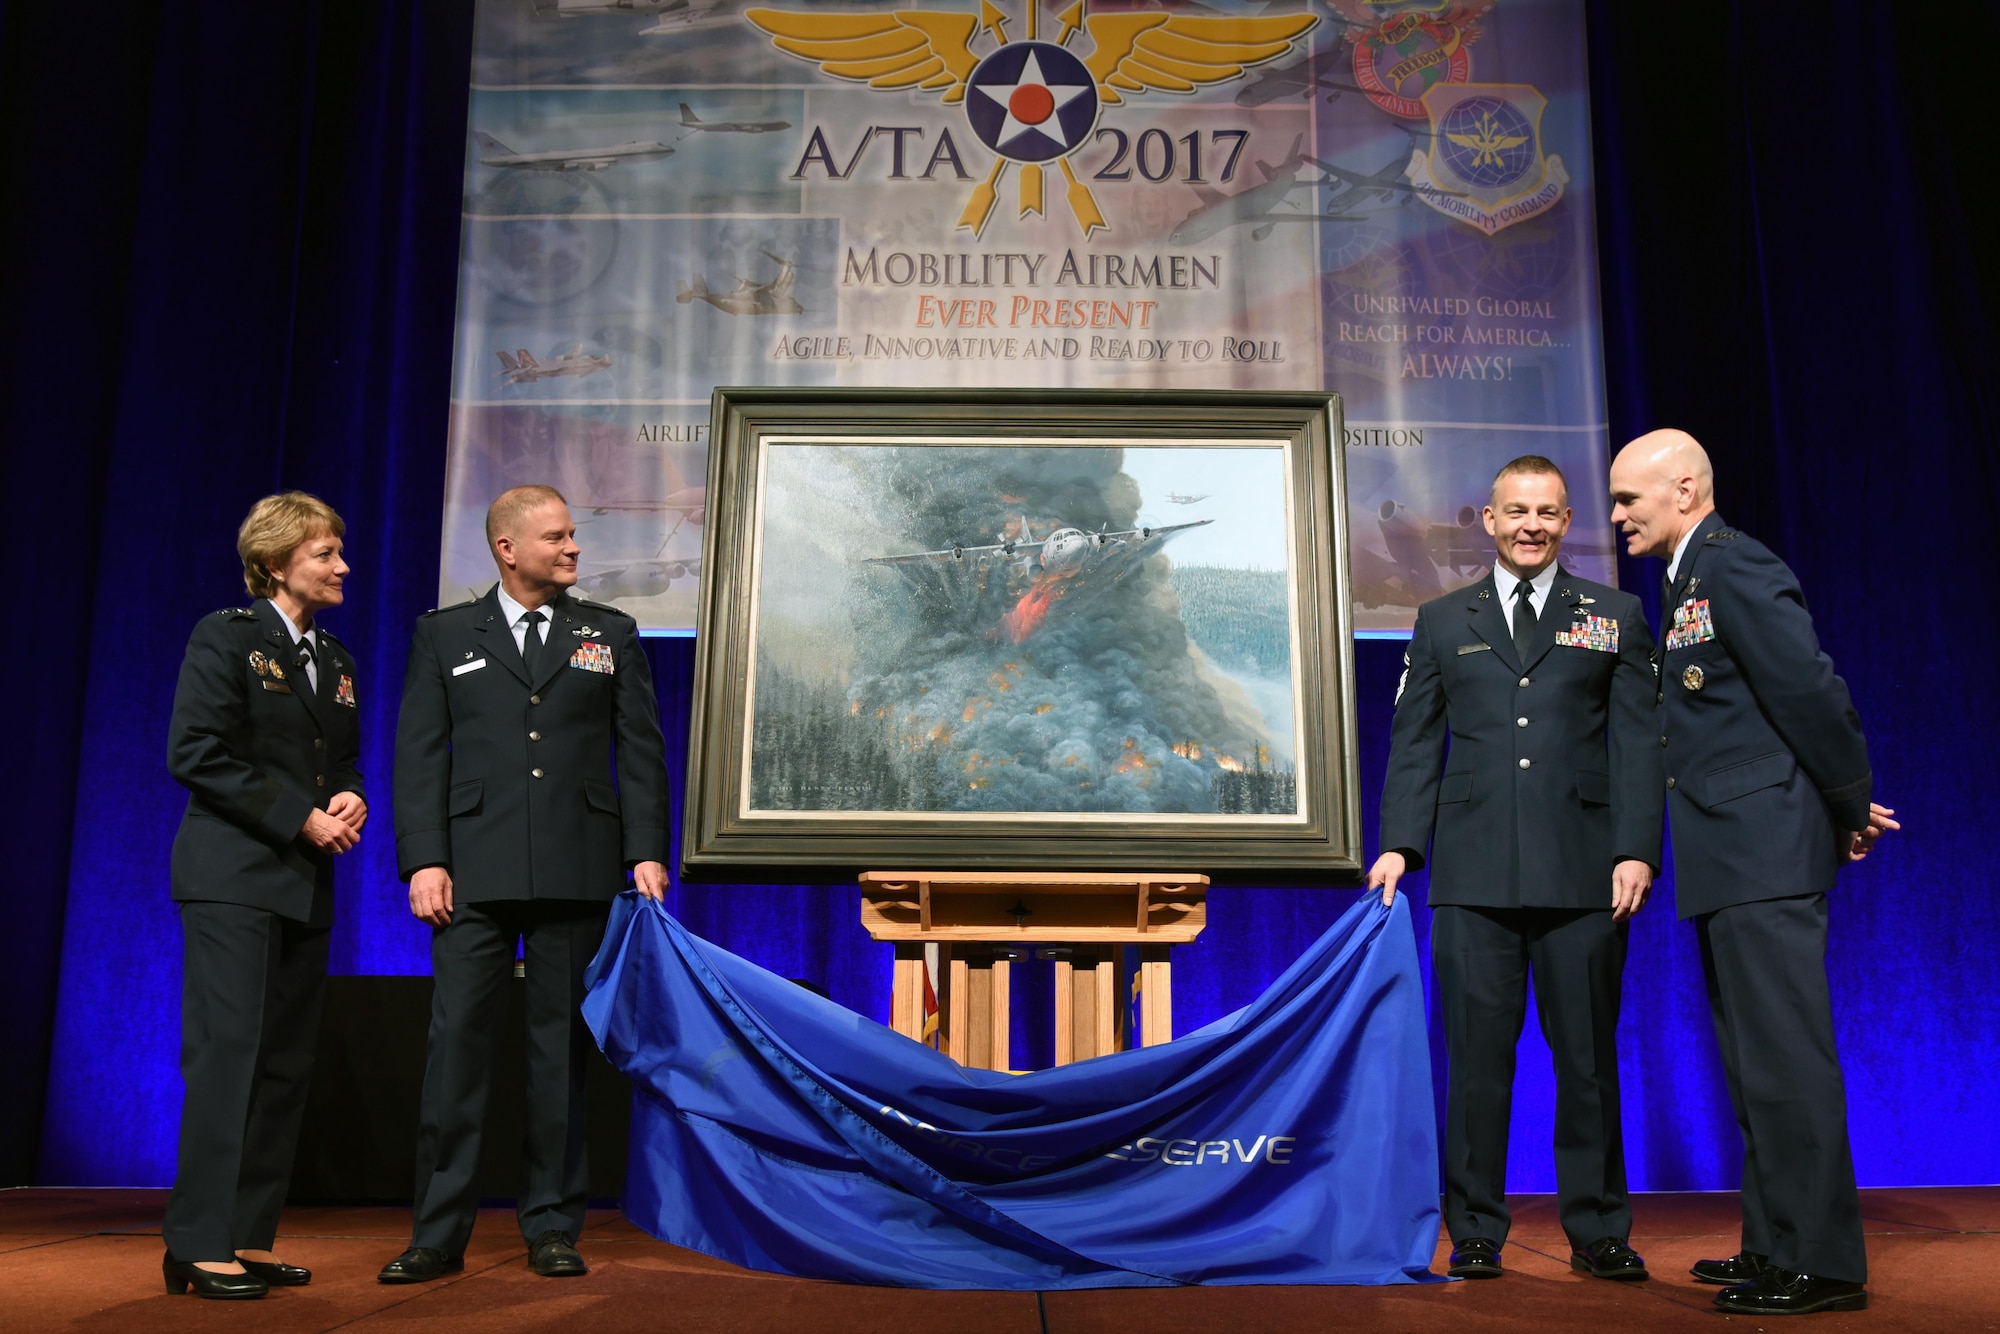 (From Left to right) Lt. Gen. Maryanne Miller, chief of the Air Force Reserve and commander of Air Force Reserve Command, Col. James Devere, 302nd Airlift Wing commander, Senior Master Sgt. Darby Perrin, artist, and Gen. Carlton D. Everhart II, commander of Air Mobility Command unveiled the painting "Earth, Blood and Fire" at the 49th annual Air Mobility Command and Airlift/Tanker Association Symposium in Orlando, Florida. The painting depicts the Modular Airborne Fire Fighting Systems mission of the 731st Airlift Squadron, 302 AW, Peterson Air Force Base, Colorado. (U.S. Air Force photo by Tech. Sgt. Peter Dean)